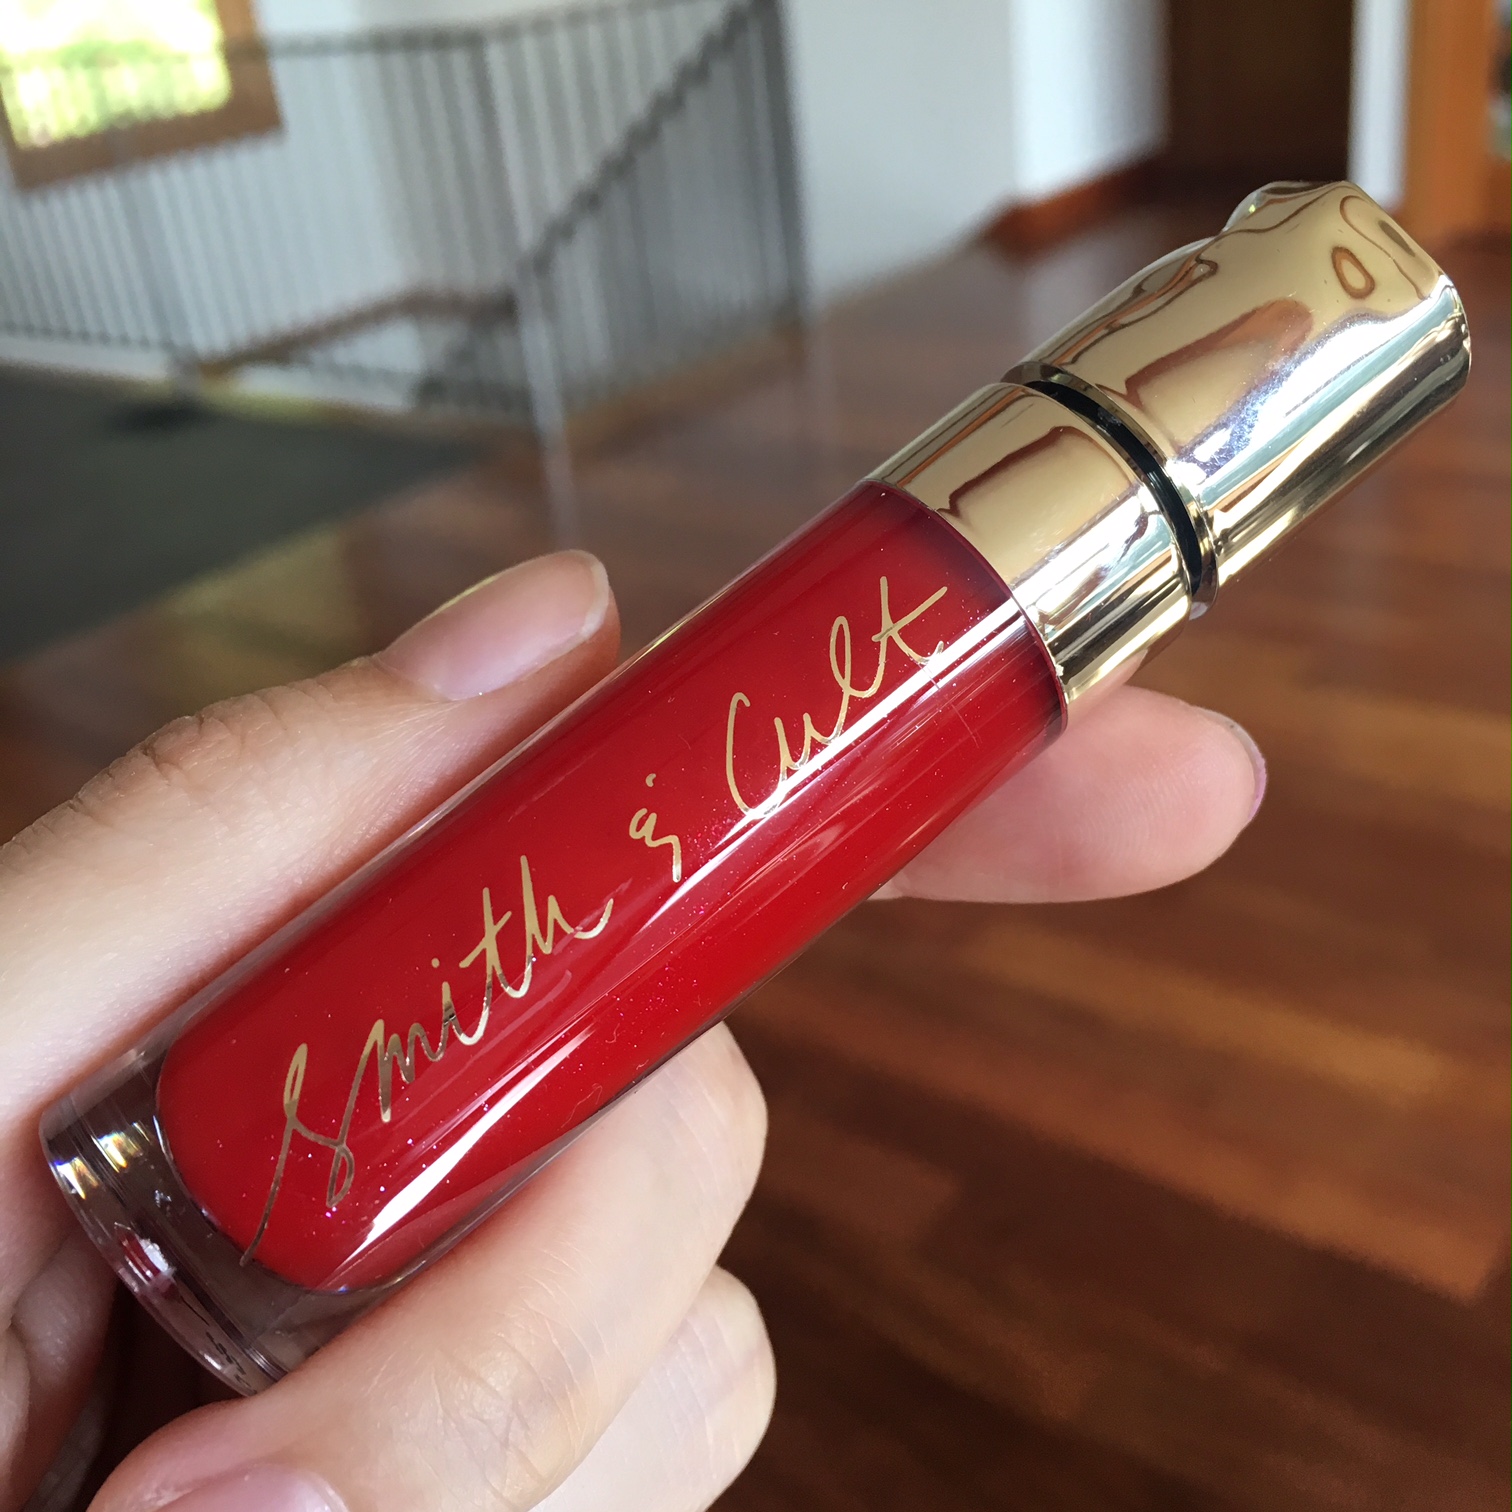 smith-and-cult-lip-lacquer